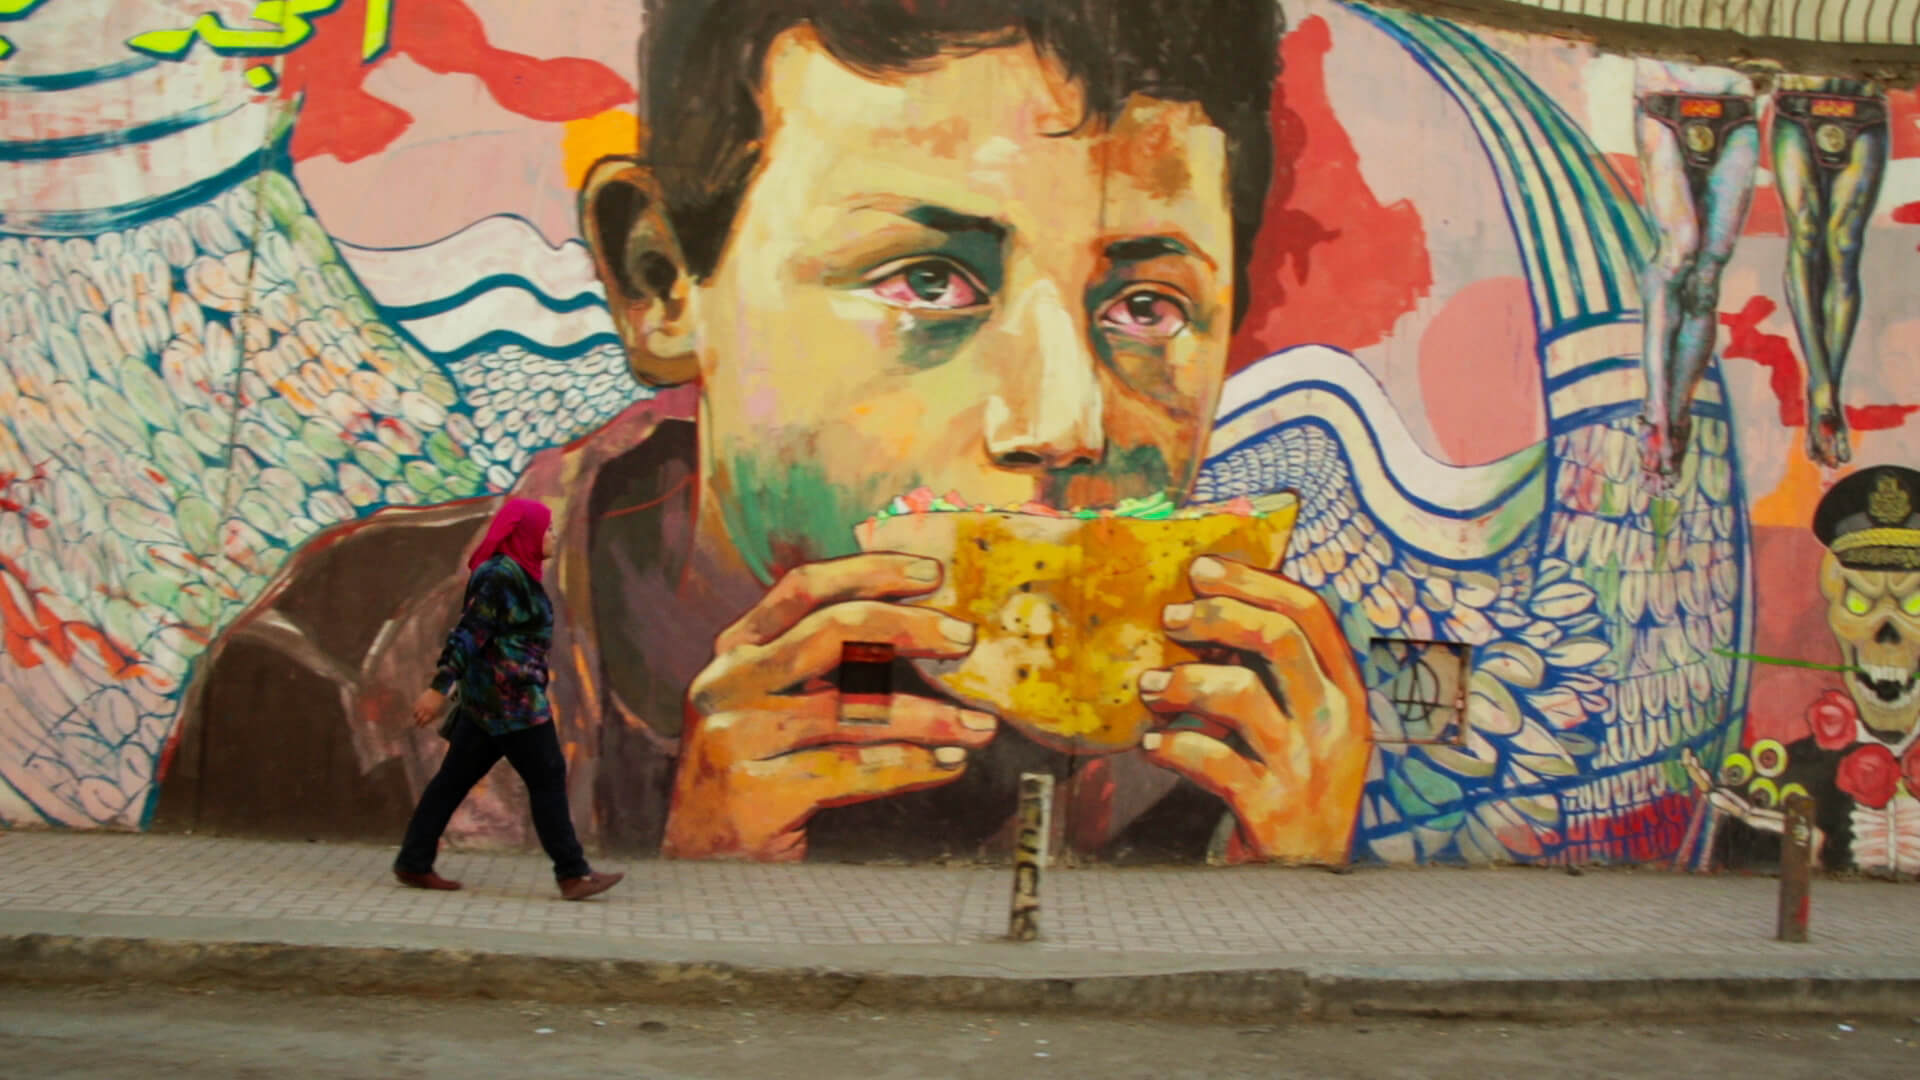 Still from The Trials of Spring. A large colorful mural of a person holding a pita with red eyes. On the sidewalk, a person is walking and looking up at the mural. Color photograph.